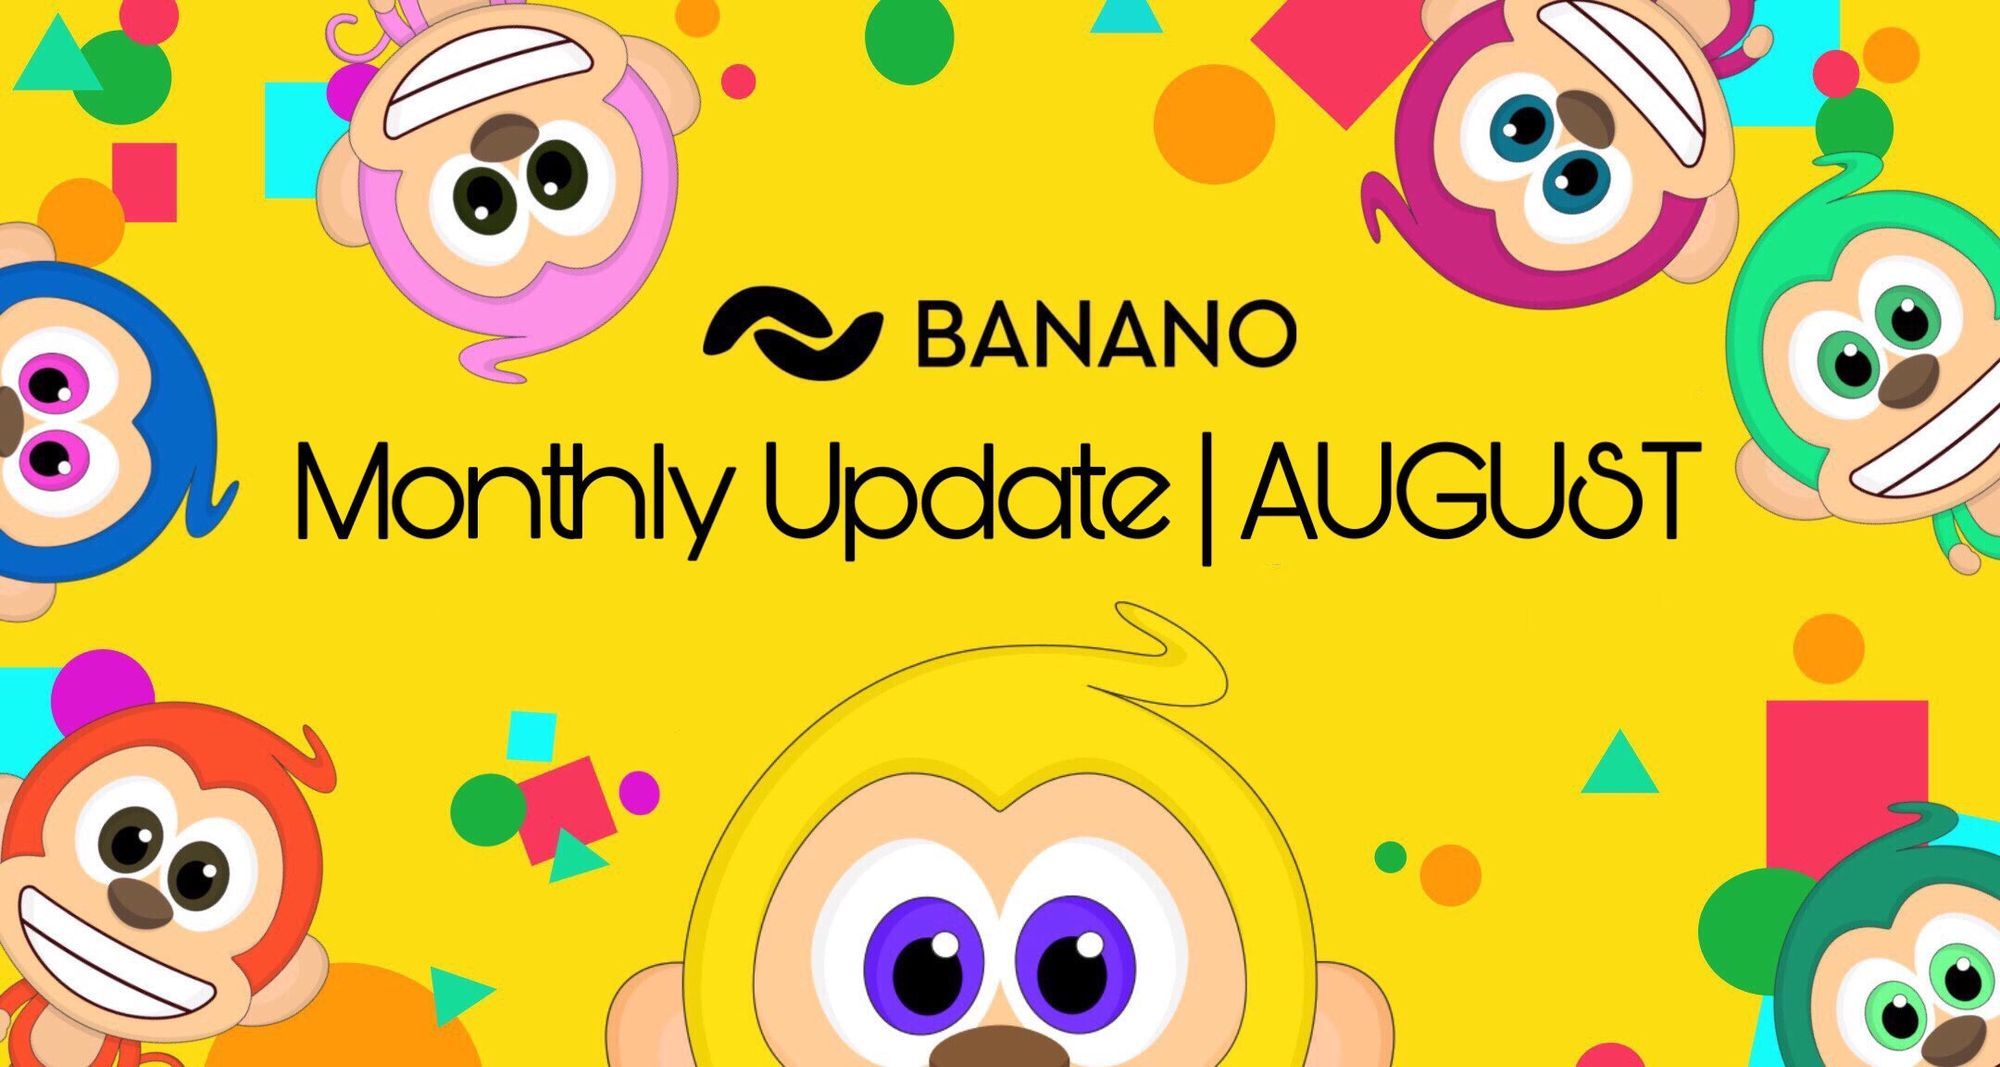 BANANO Monthly Update #28 (August 2020)